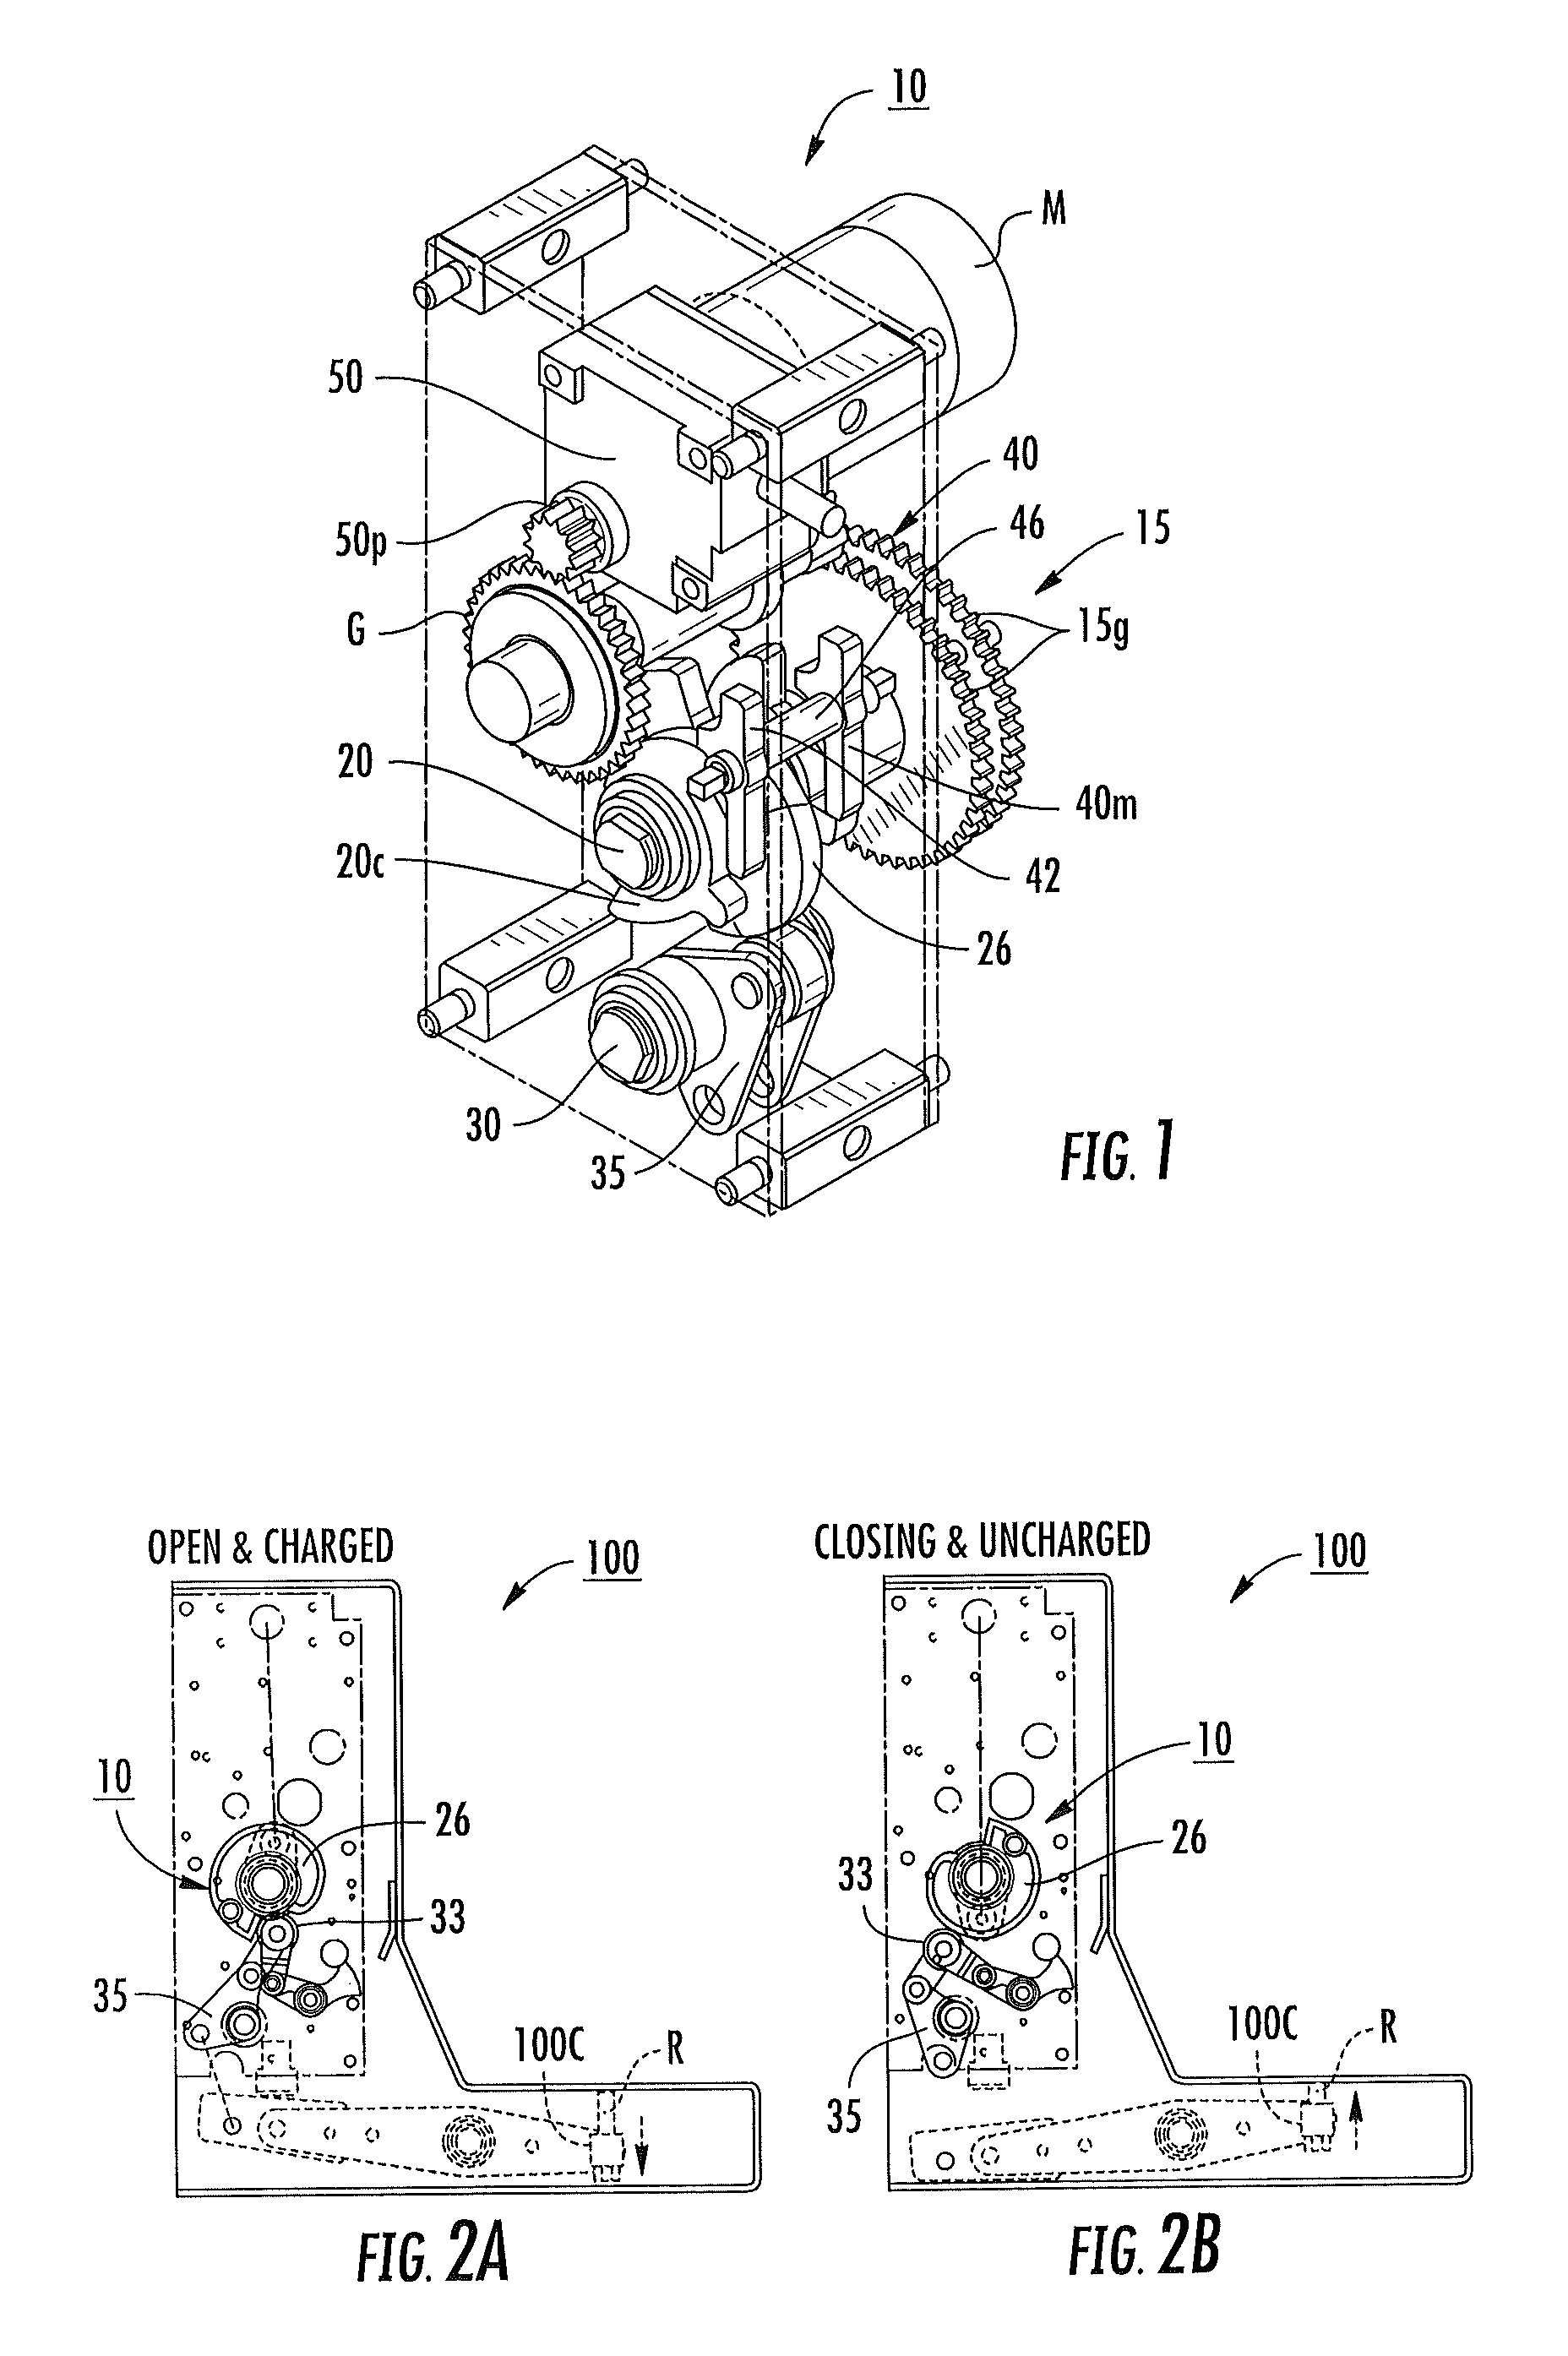 Circuit breakers with clock spring drives and/or multi-lobe drive cams and related actuators and methods